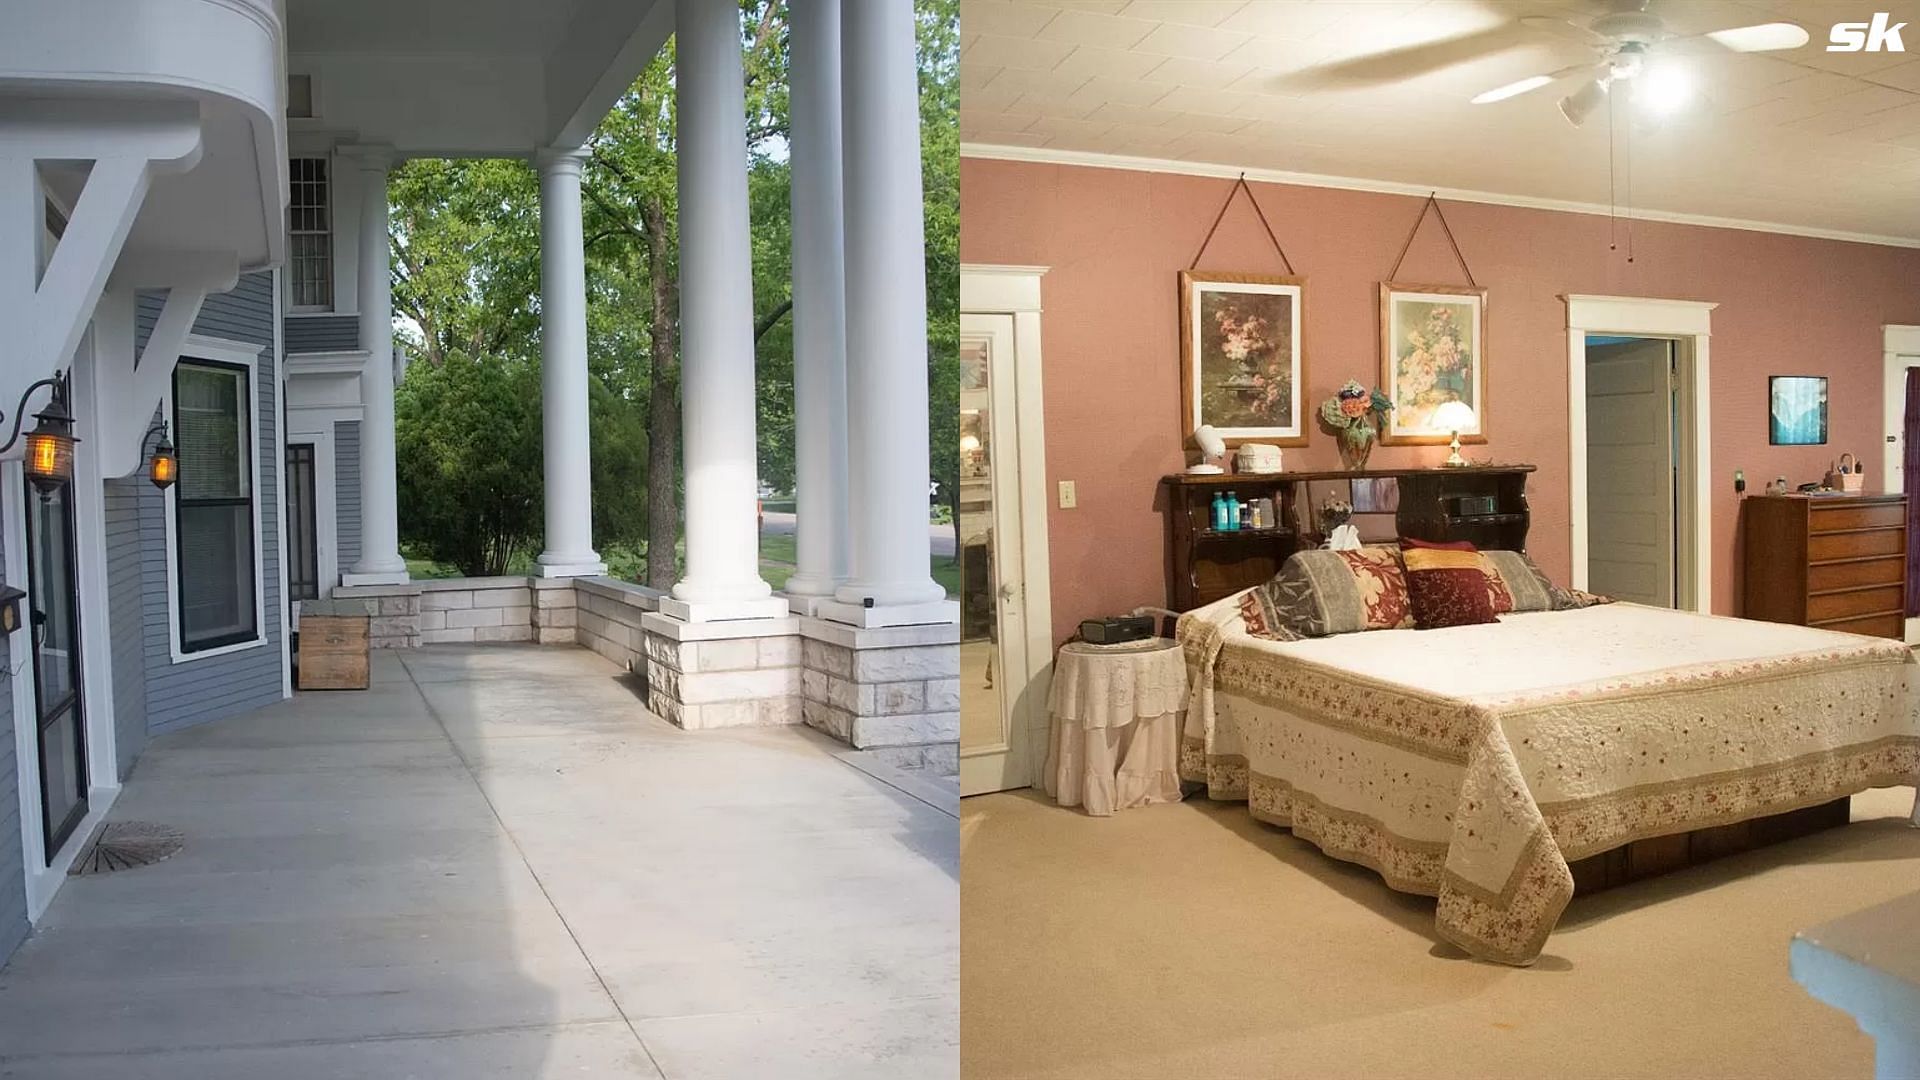 Bedroom and outside porch of Mickey Mantle&#039;s mansion in Independence, Kansas